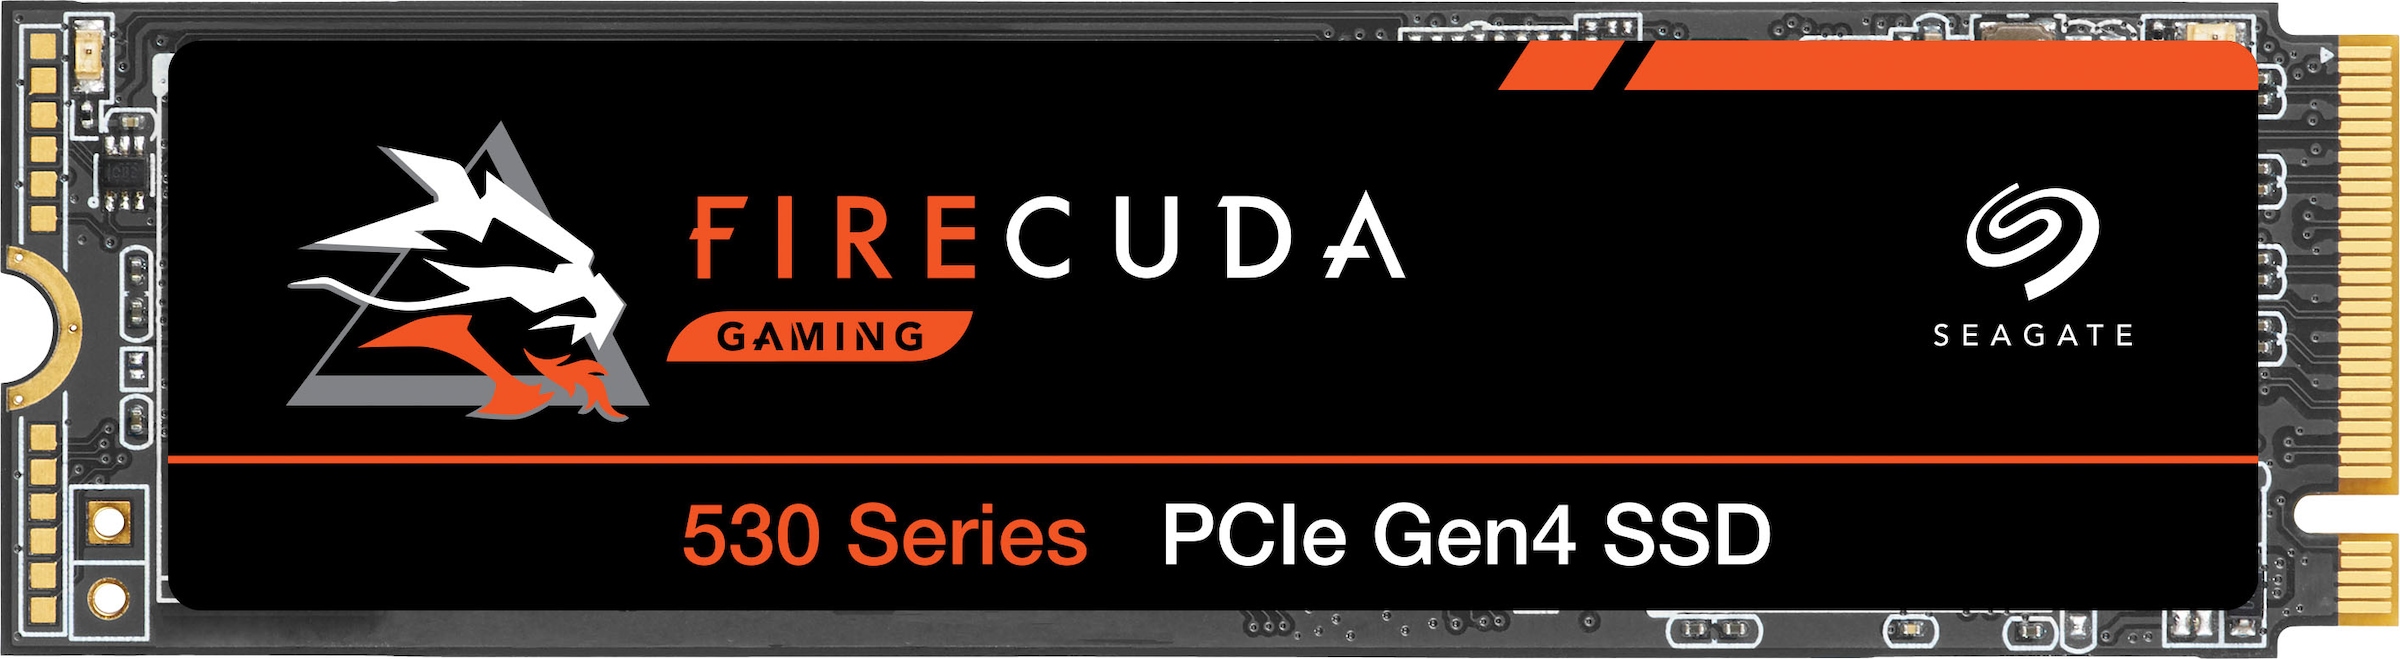 Gaming-SSD »FireCuda 530«, Anschluss M.2 PCIe 4.0, Inklusive 3 Jahre Rescue Data...